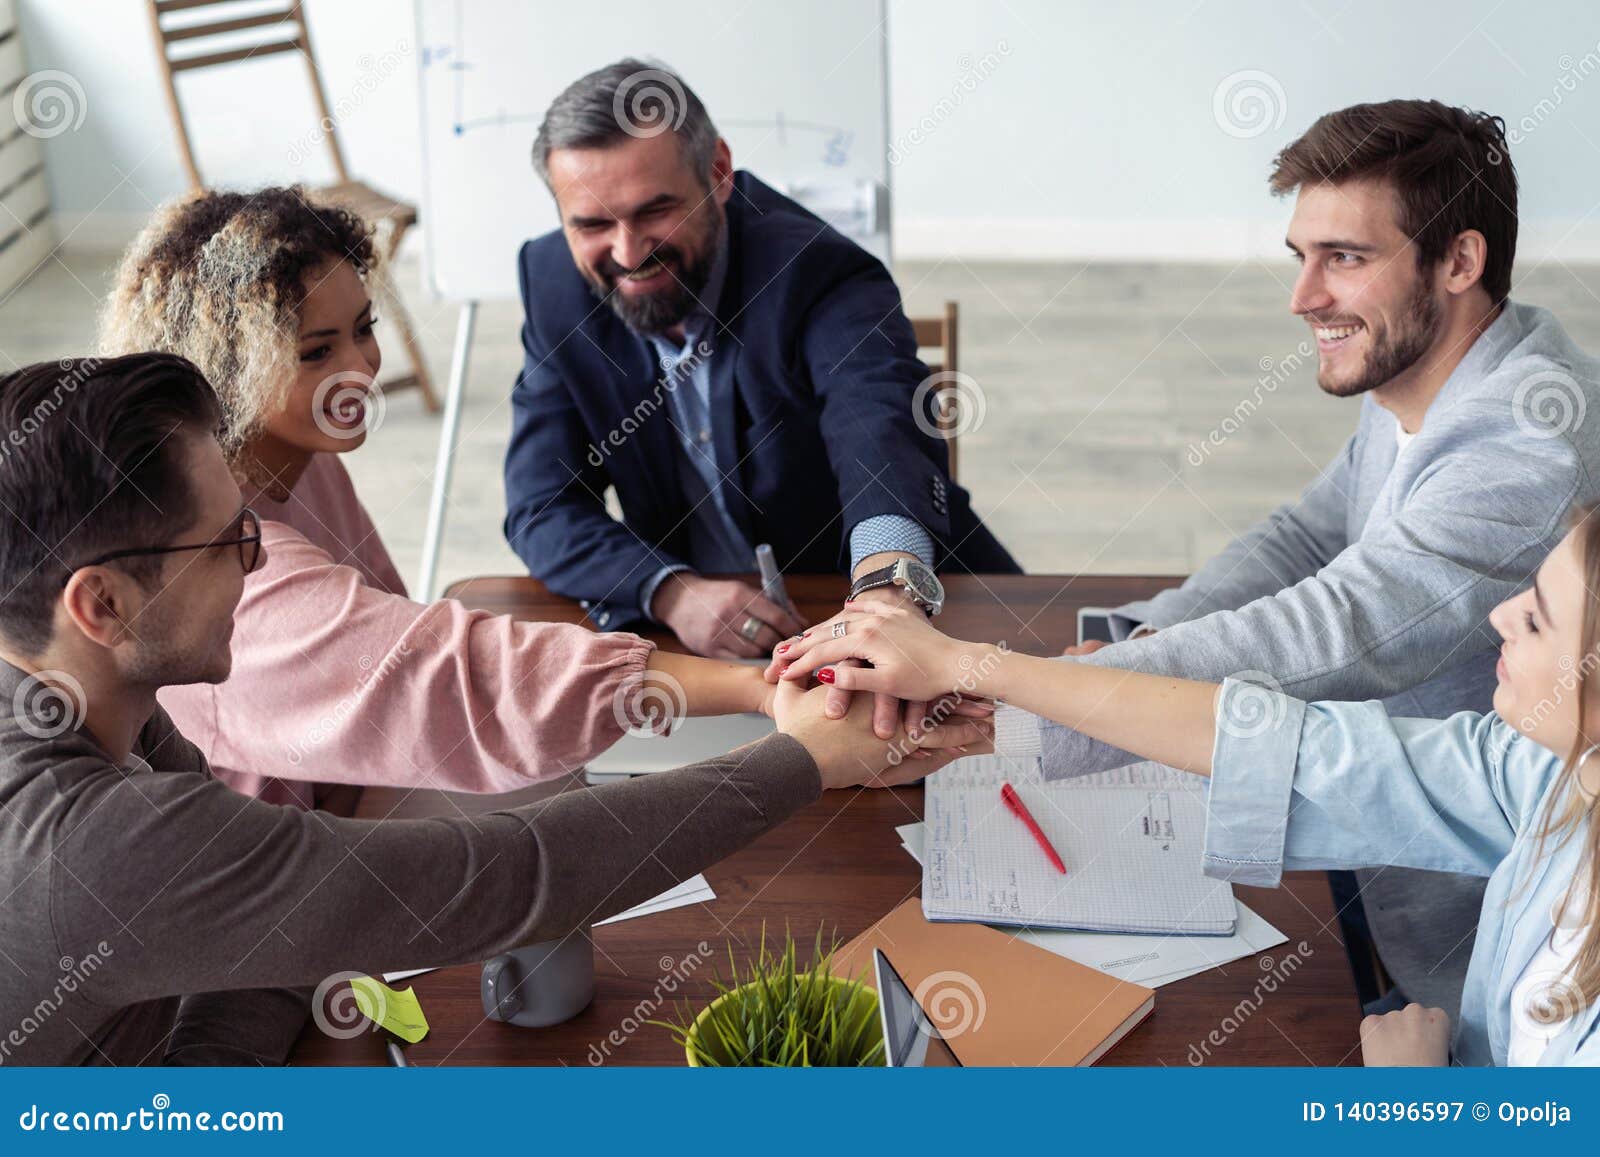 business partners hands on top of each other izing companionship.